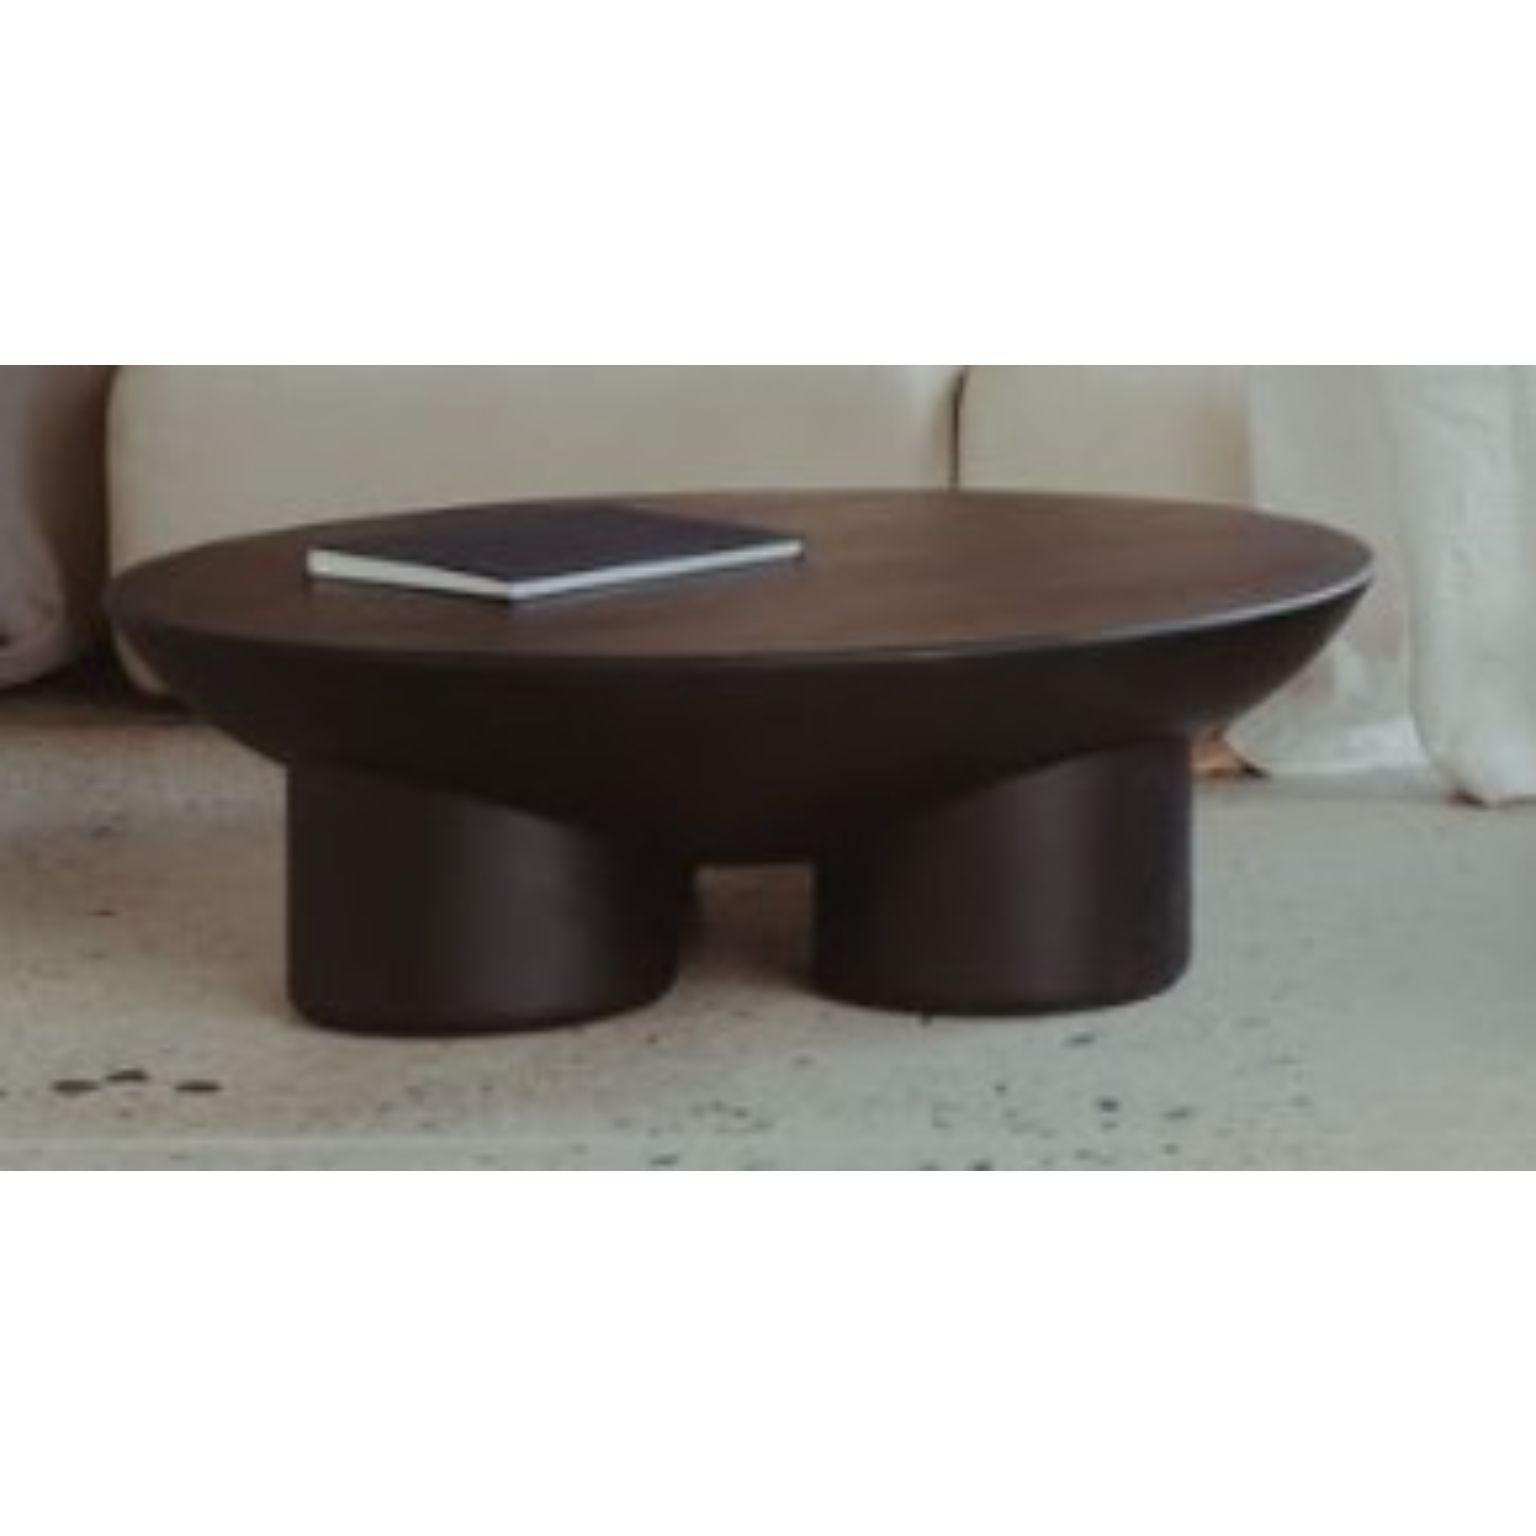 Metate Black Wood Coffee Table by David Del Valle
Dimensions: D 100 x W 100 x H 30 cm.
Materials: Black wood.

DAVID VALLE
We are a place, a space, a woven chair, the dreams of a craftsman, the pride of a worker, we are a way of thinking, we are